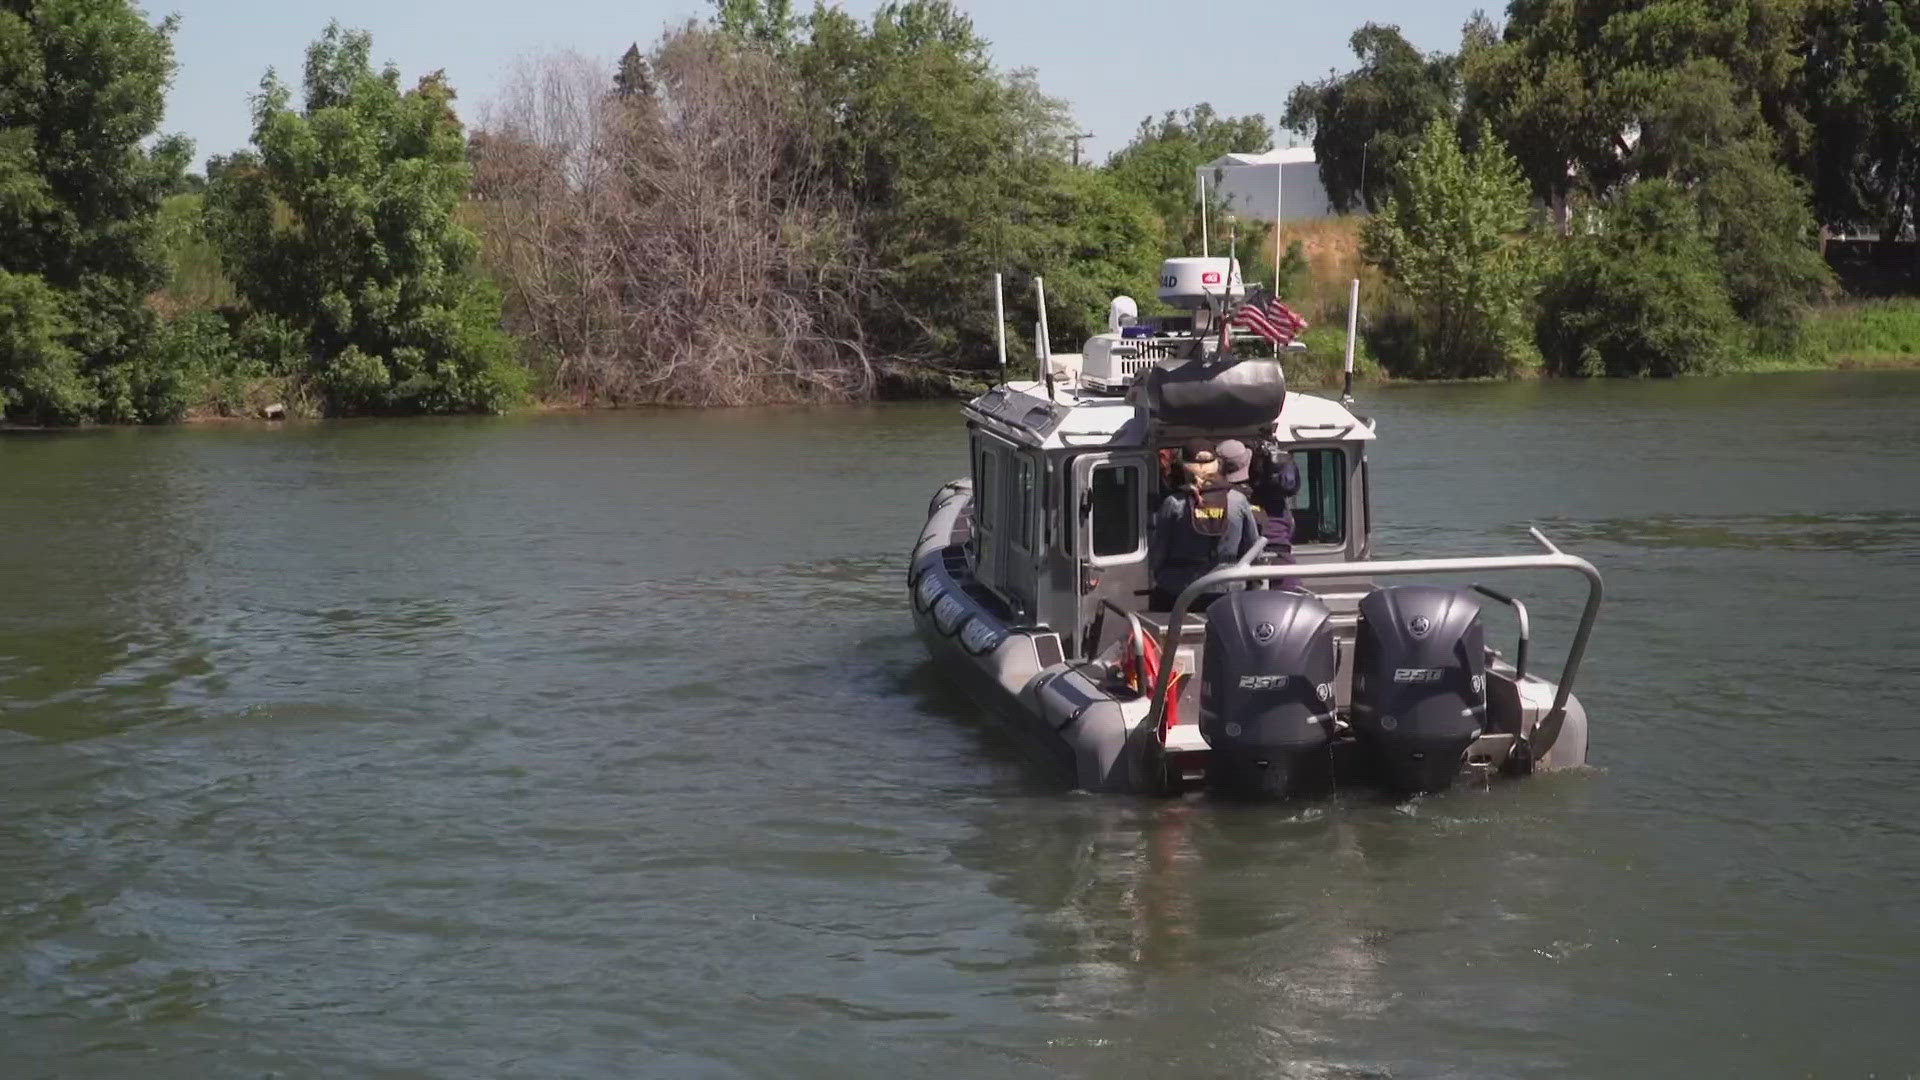 Sacramento Co. deputies prepared for the worst on waterways as temps rise